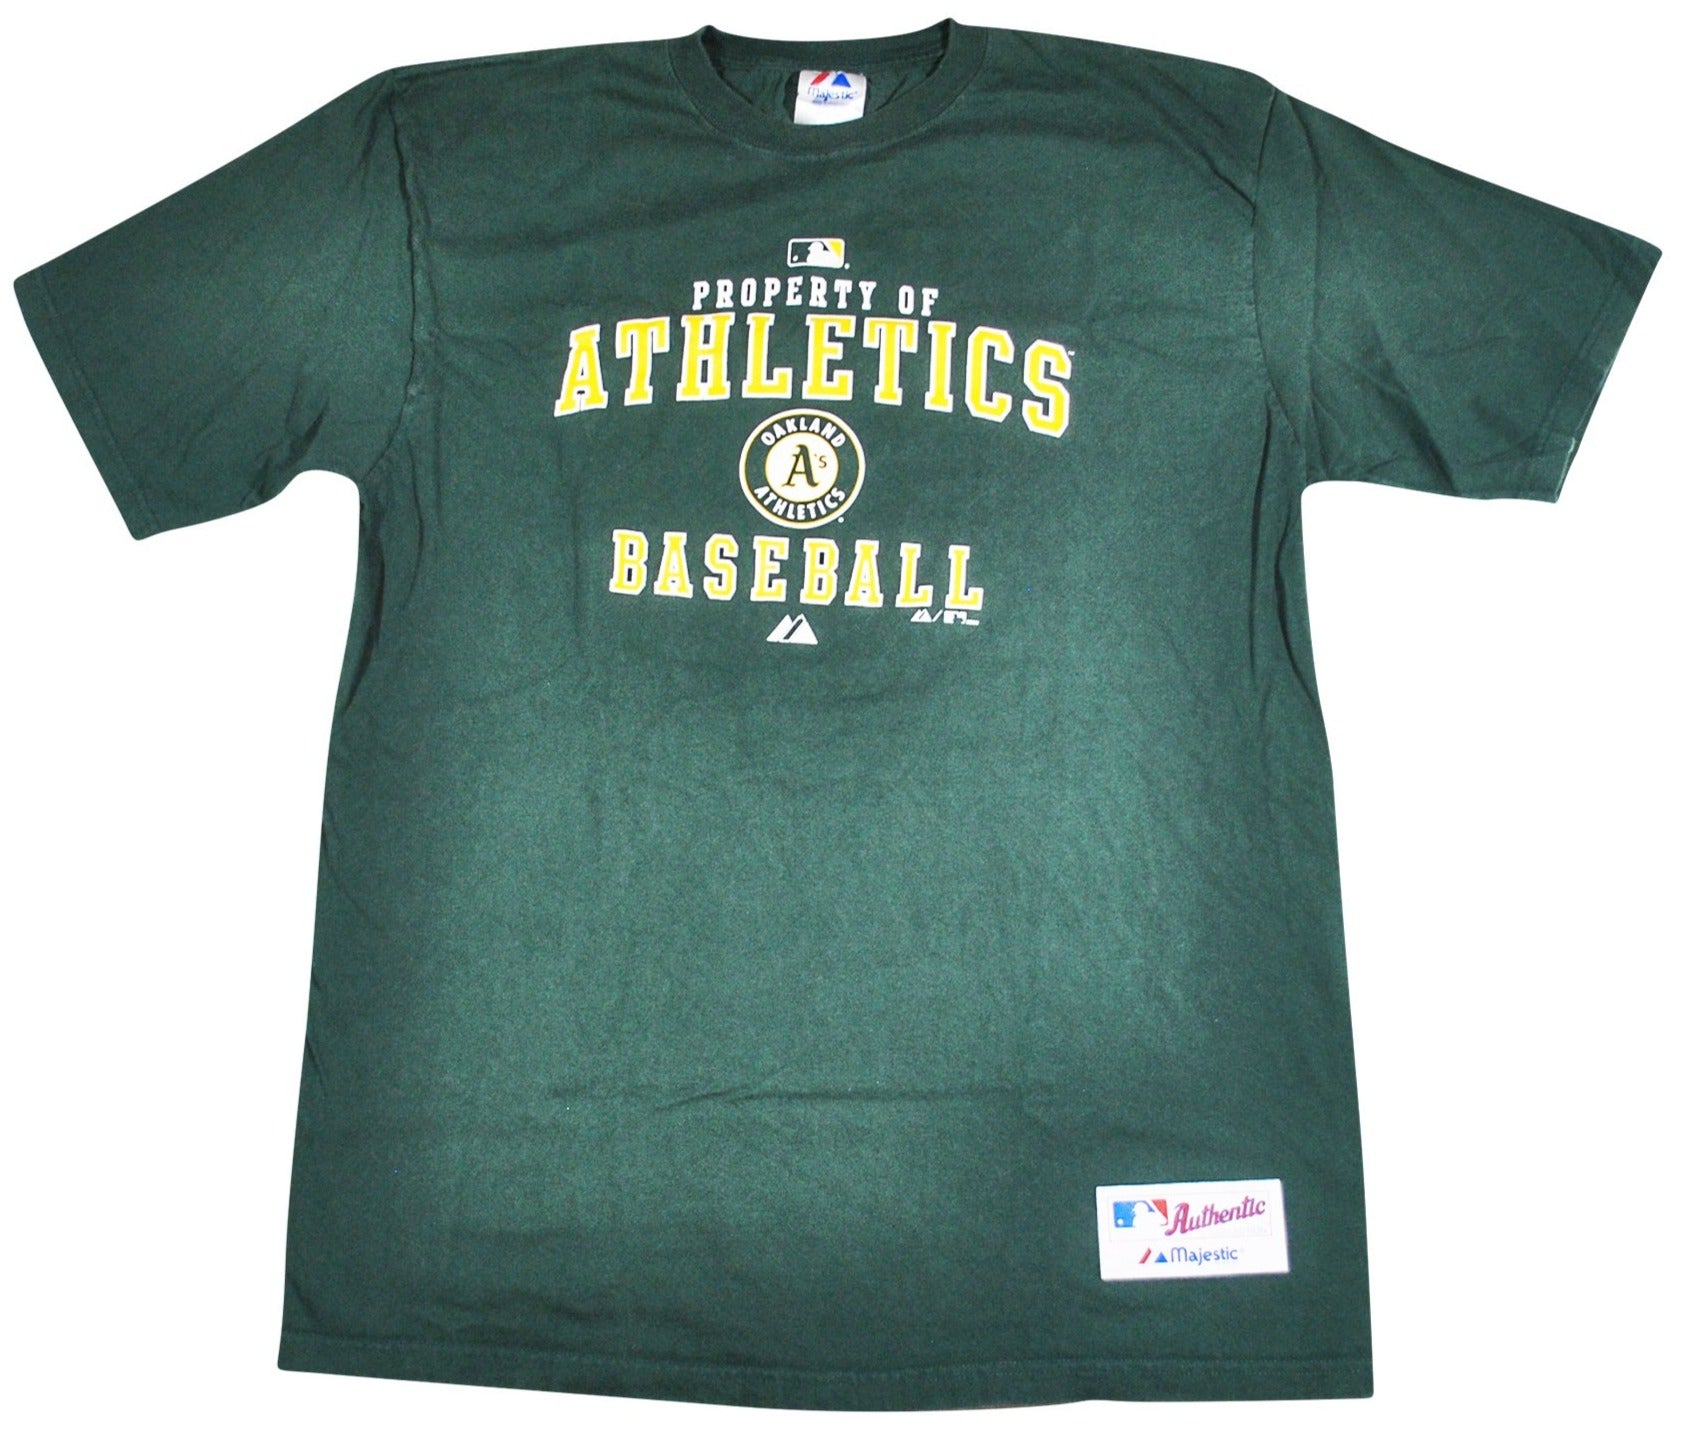 Oakland A’s Athletics Since 1968 Mens Tee Shirt Large Green & Gold, NWT’s